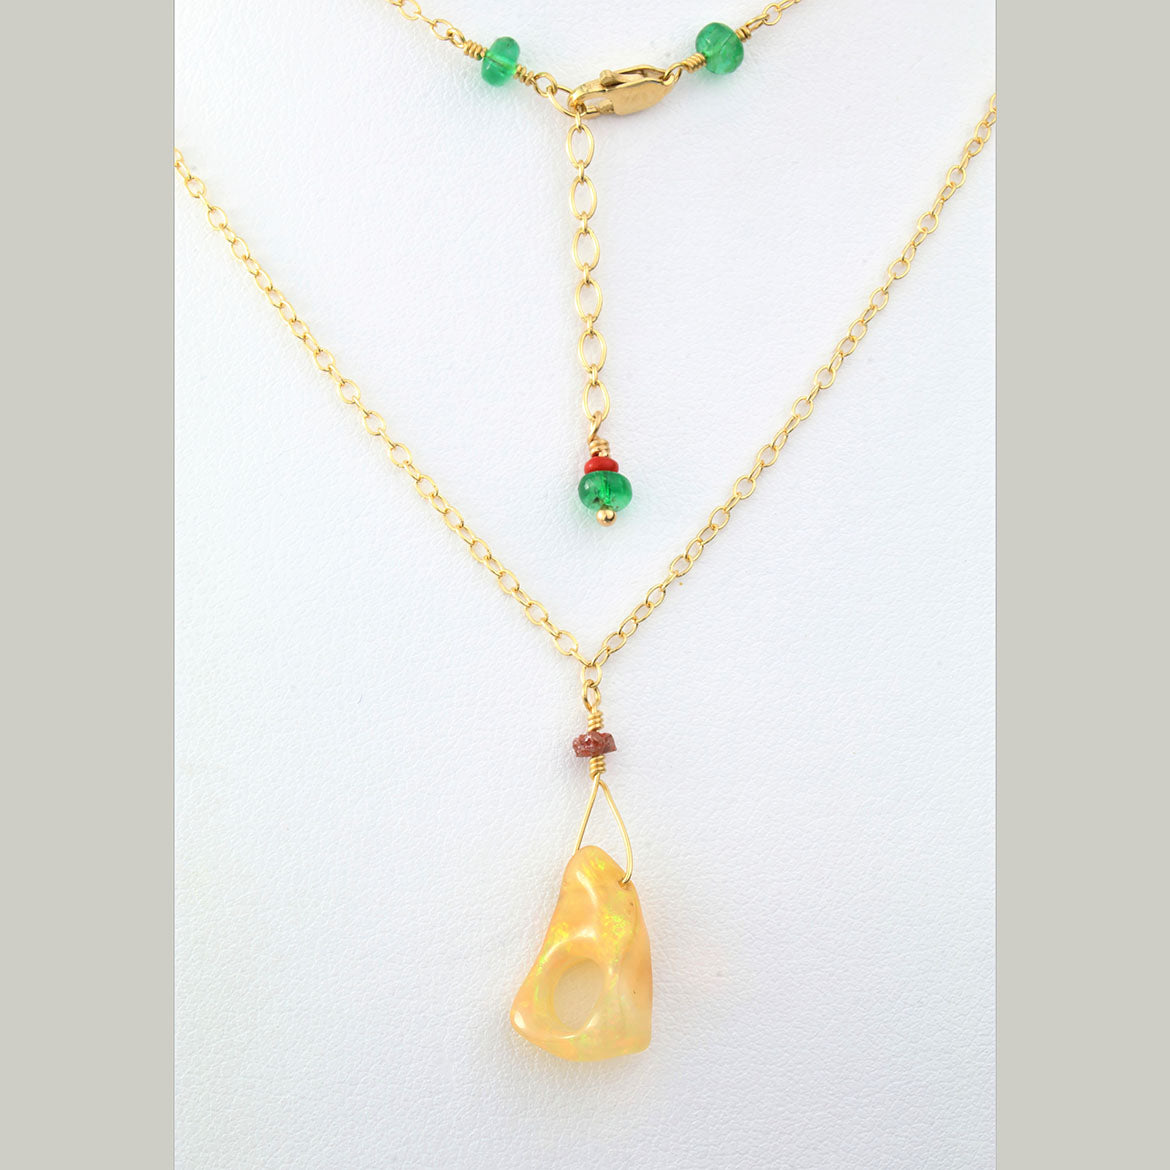 Genuine Ethiopian Opal with Emeralds on Gold